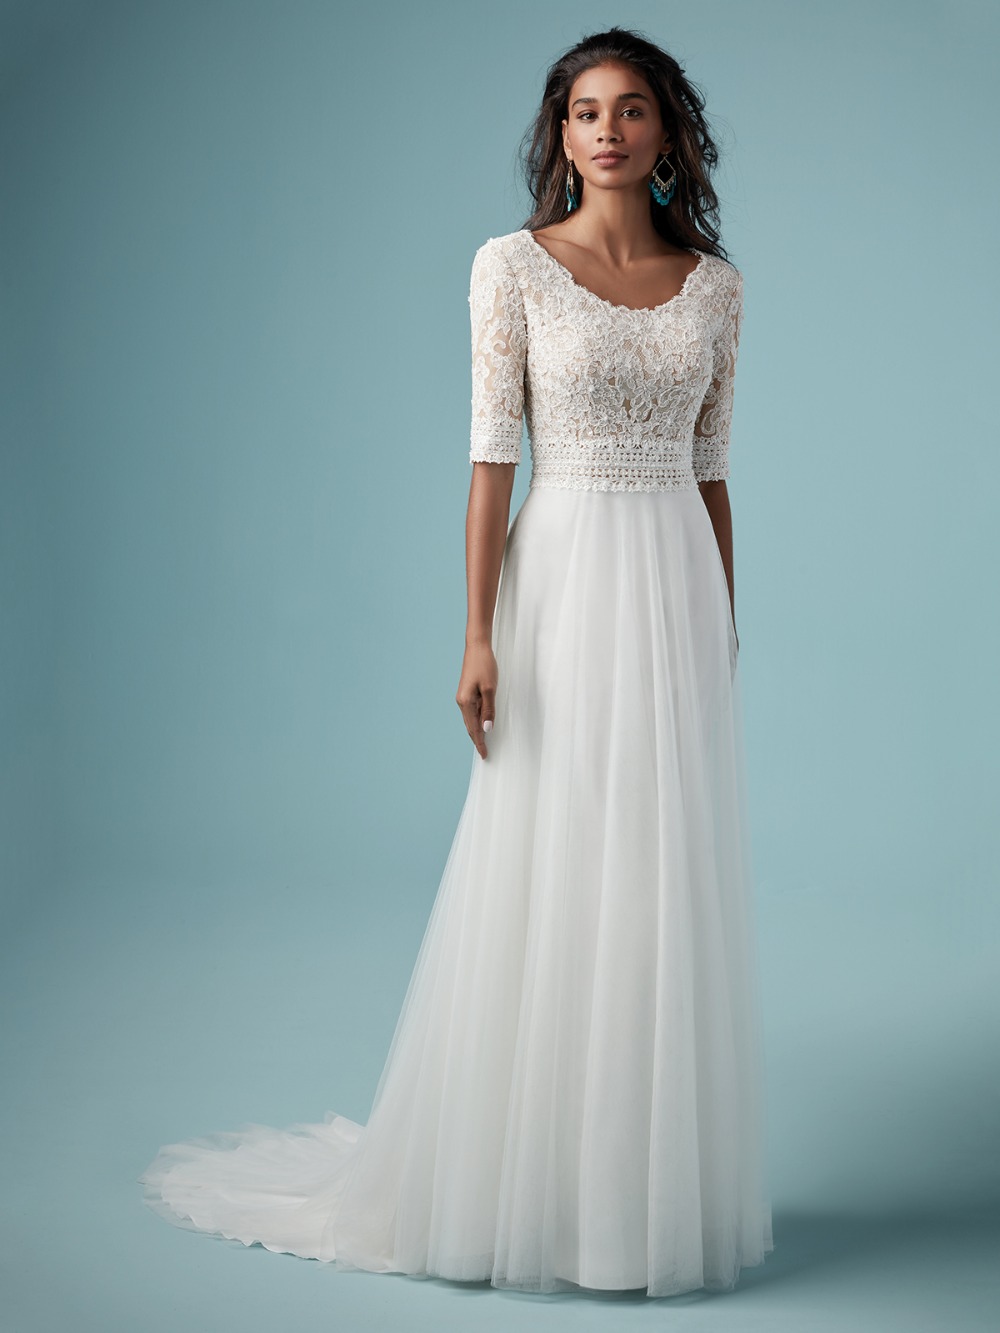 maggie-sottero-monarch-leigh-9ms876-main